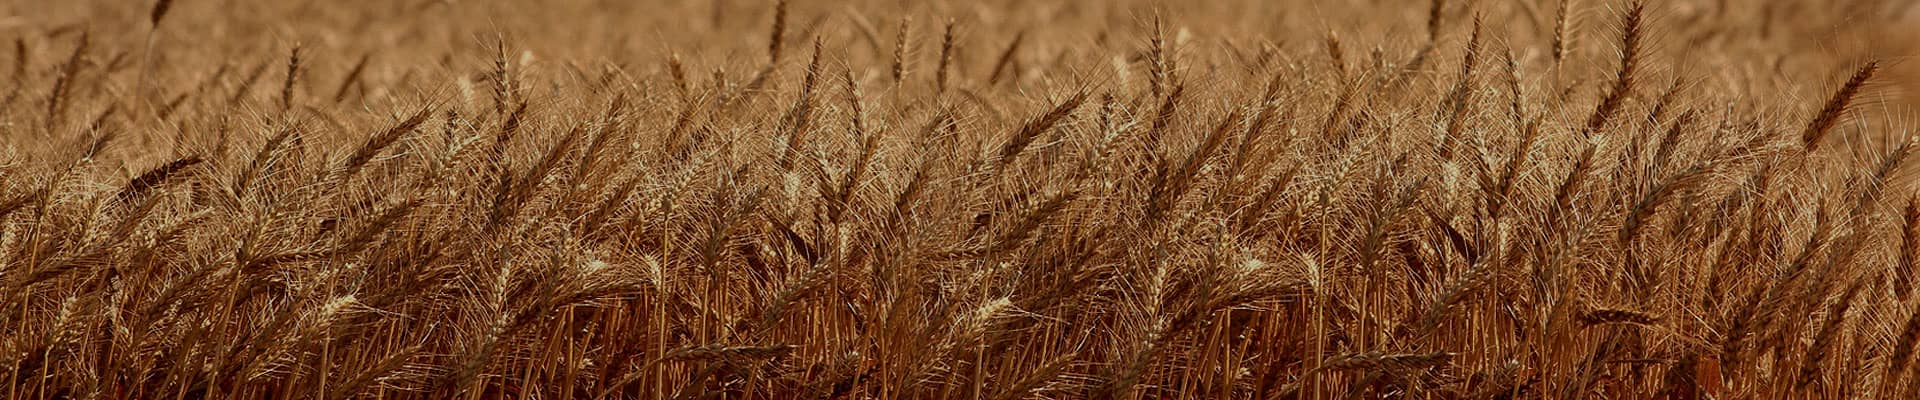 filed of wheat